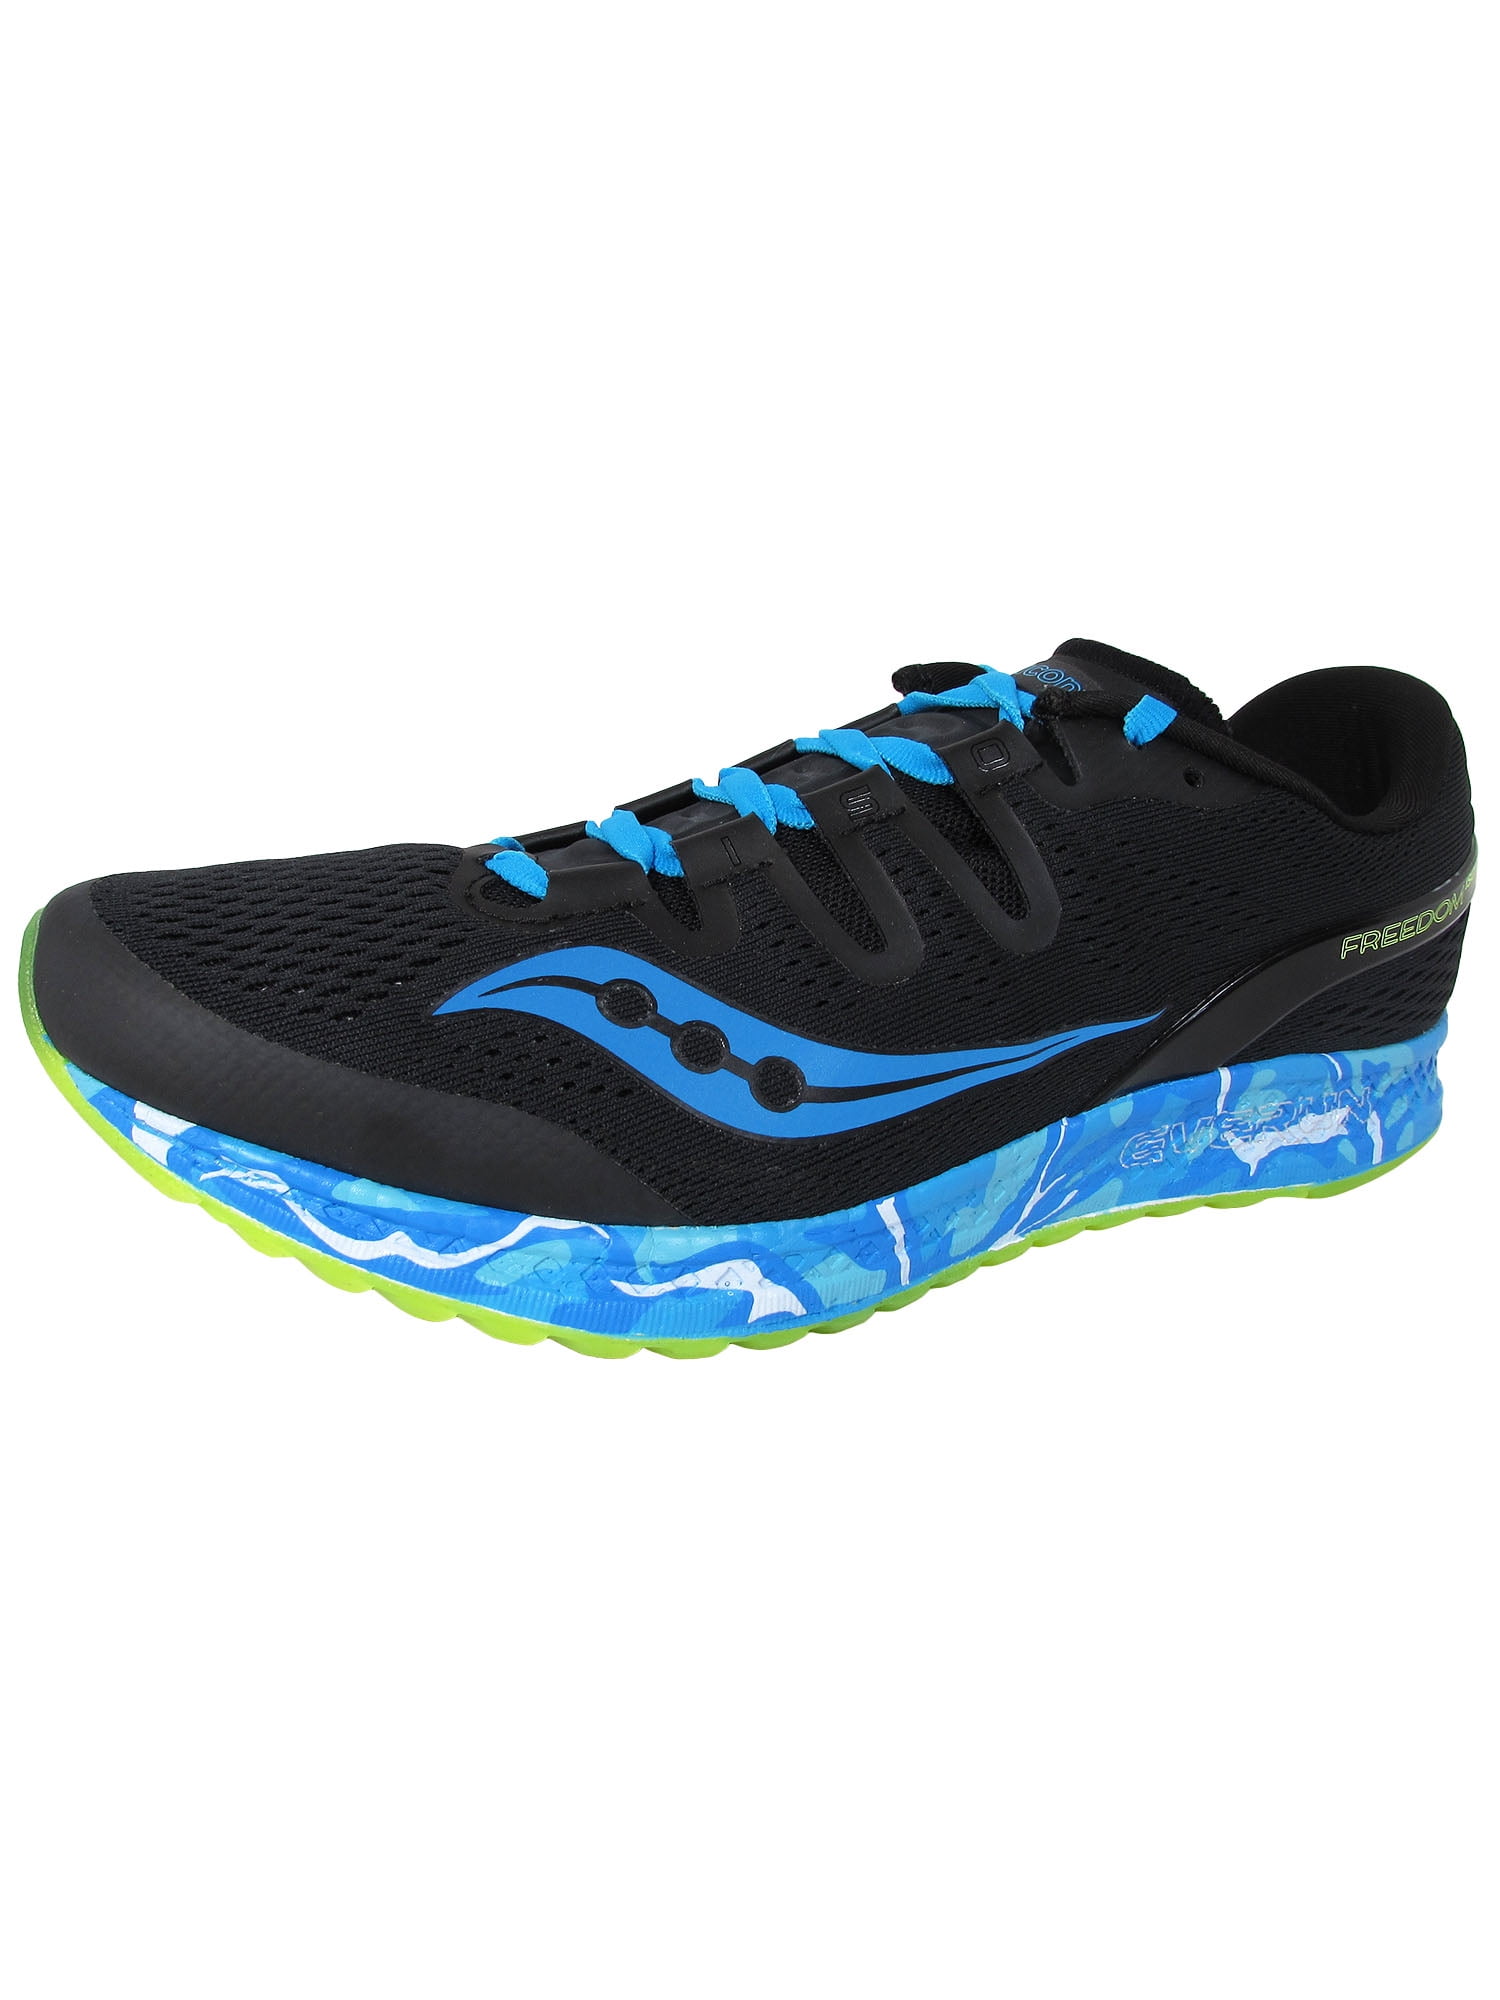 saucony men's freedom iso running shoes